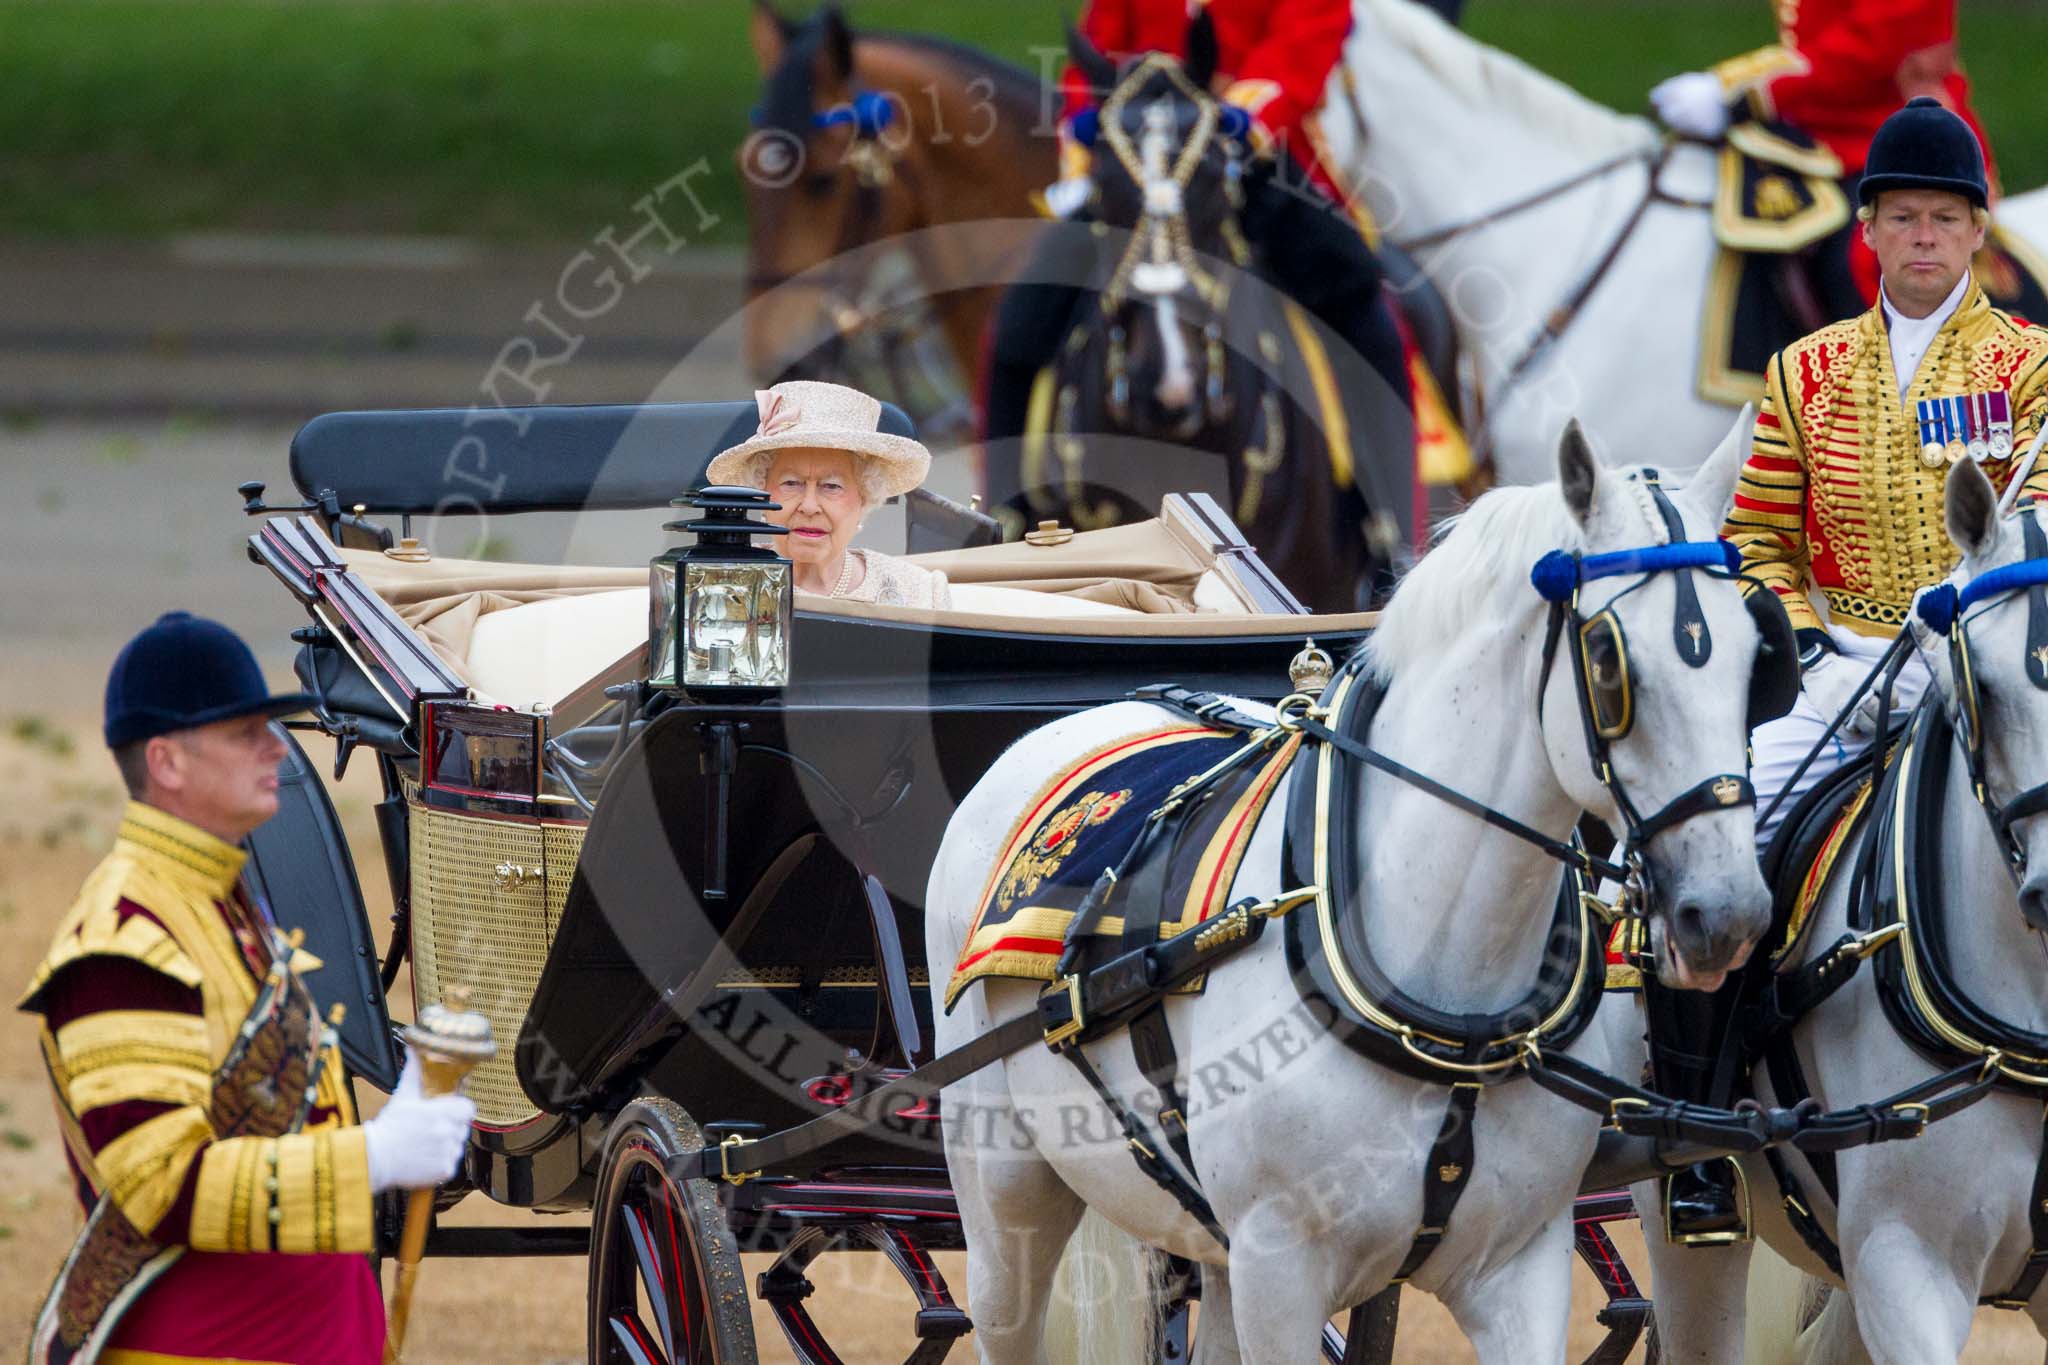 Trooping the Colour 2015.
Horse Guards Parade, Westminster,
London,

United Kingdom,
on 13 June 2015 at 11:05, image #294